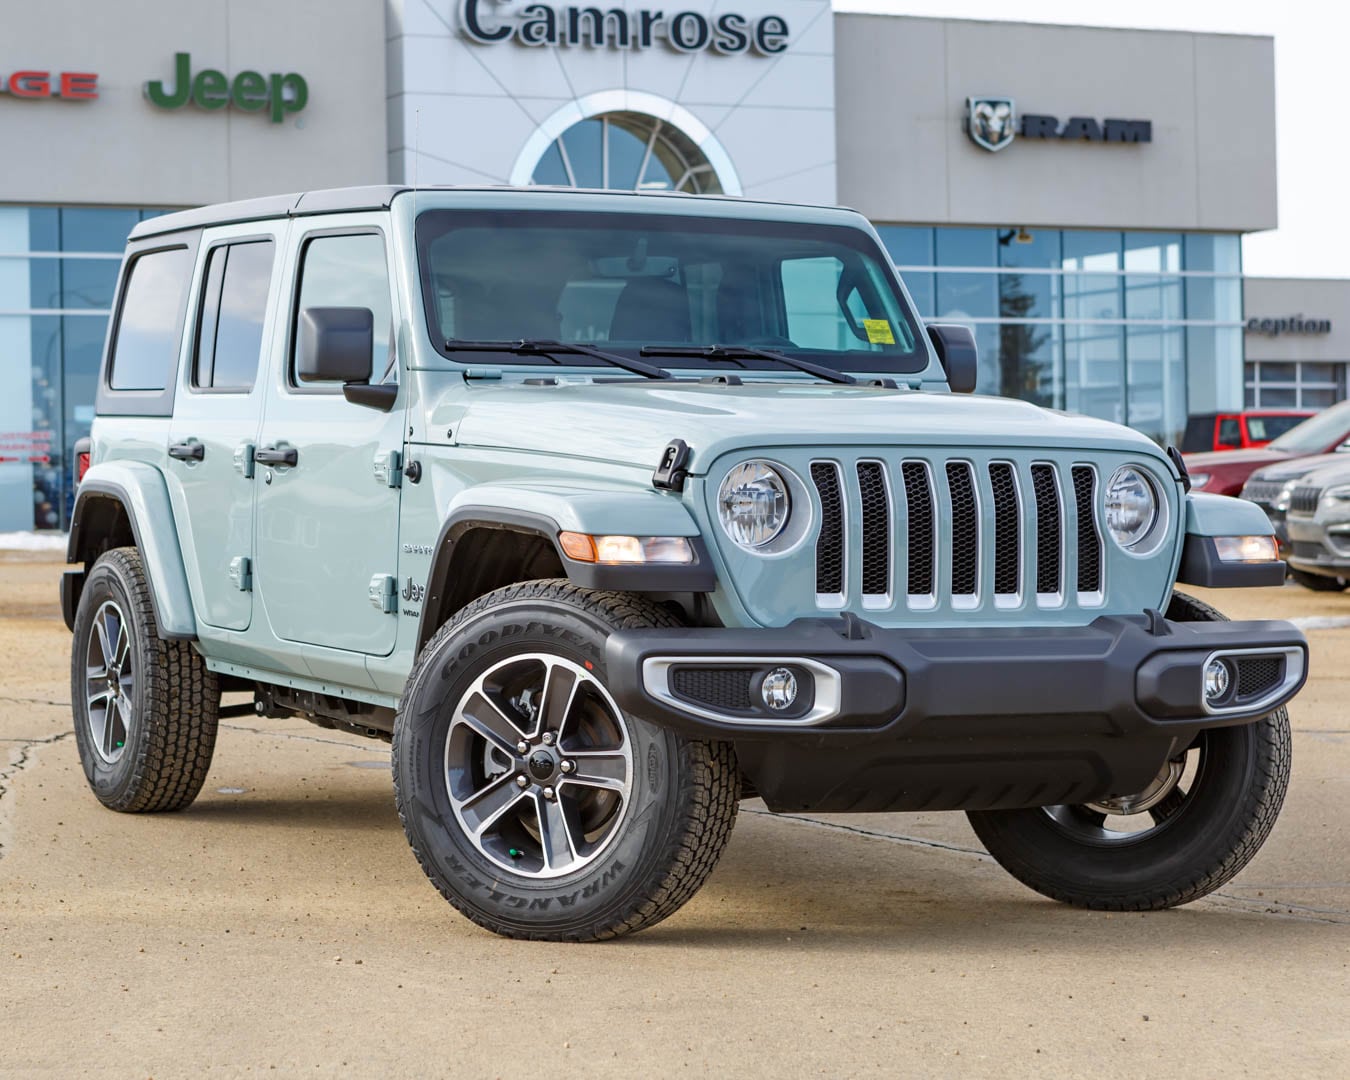 Actualizar 72+ imagen i want to lease a jeep wrangler 